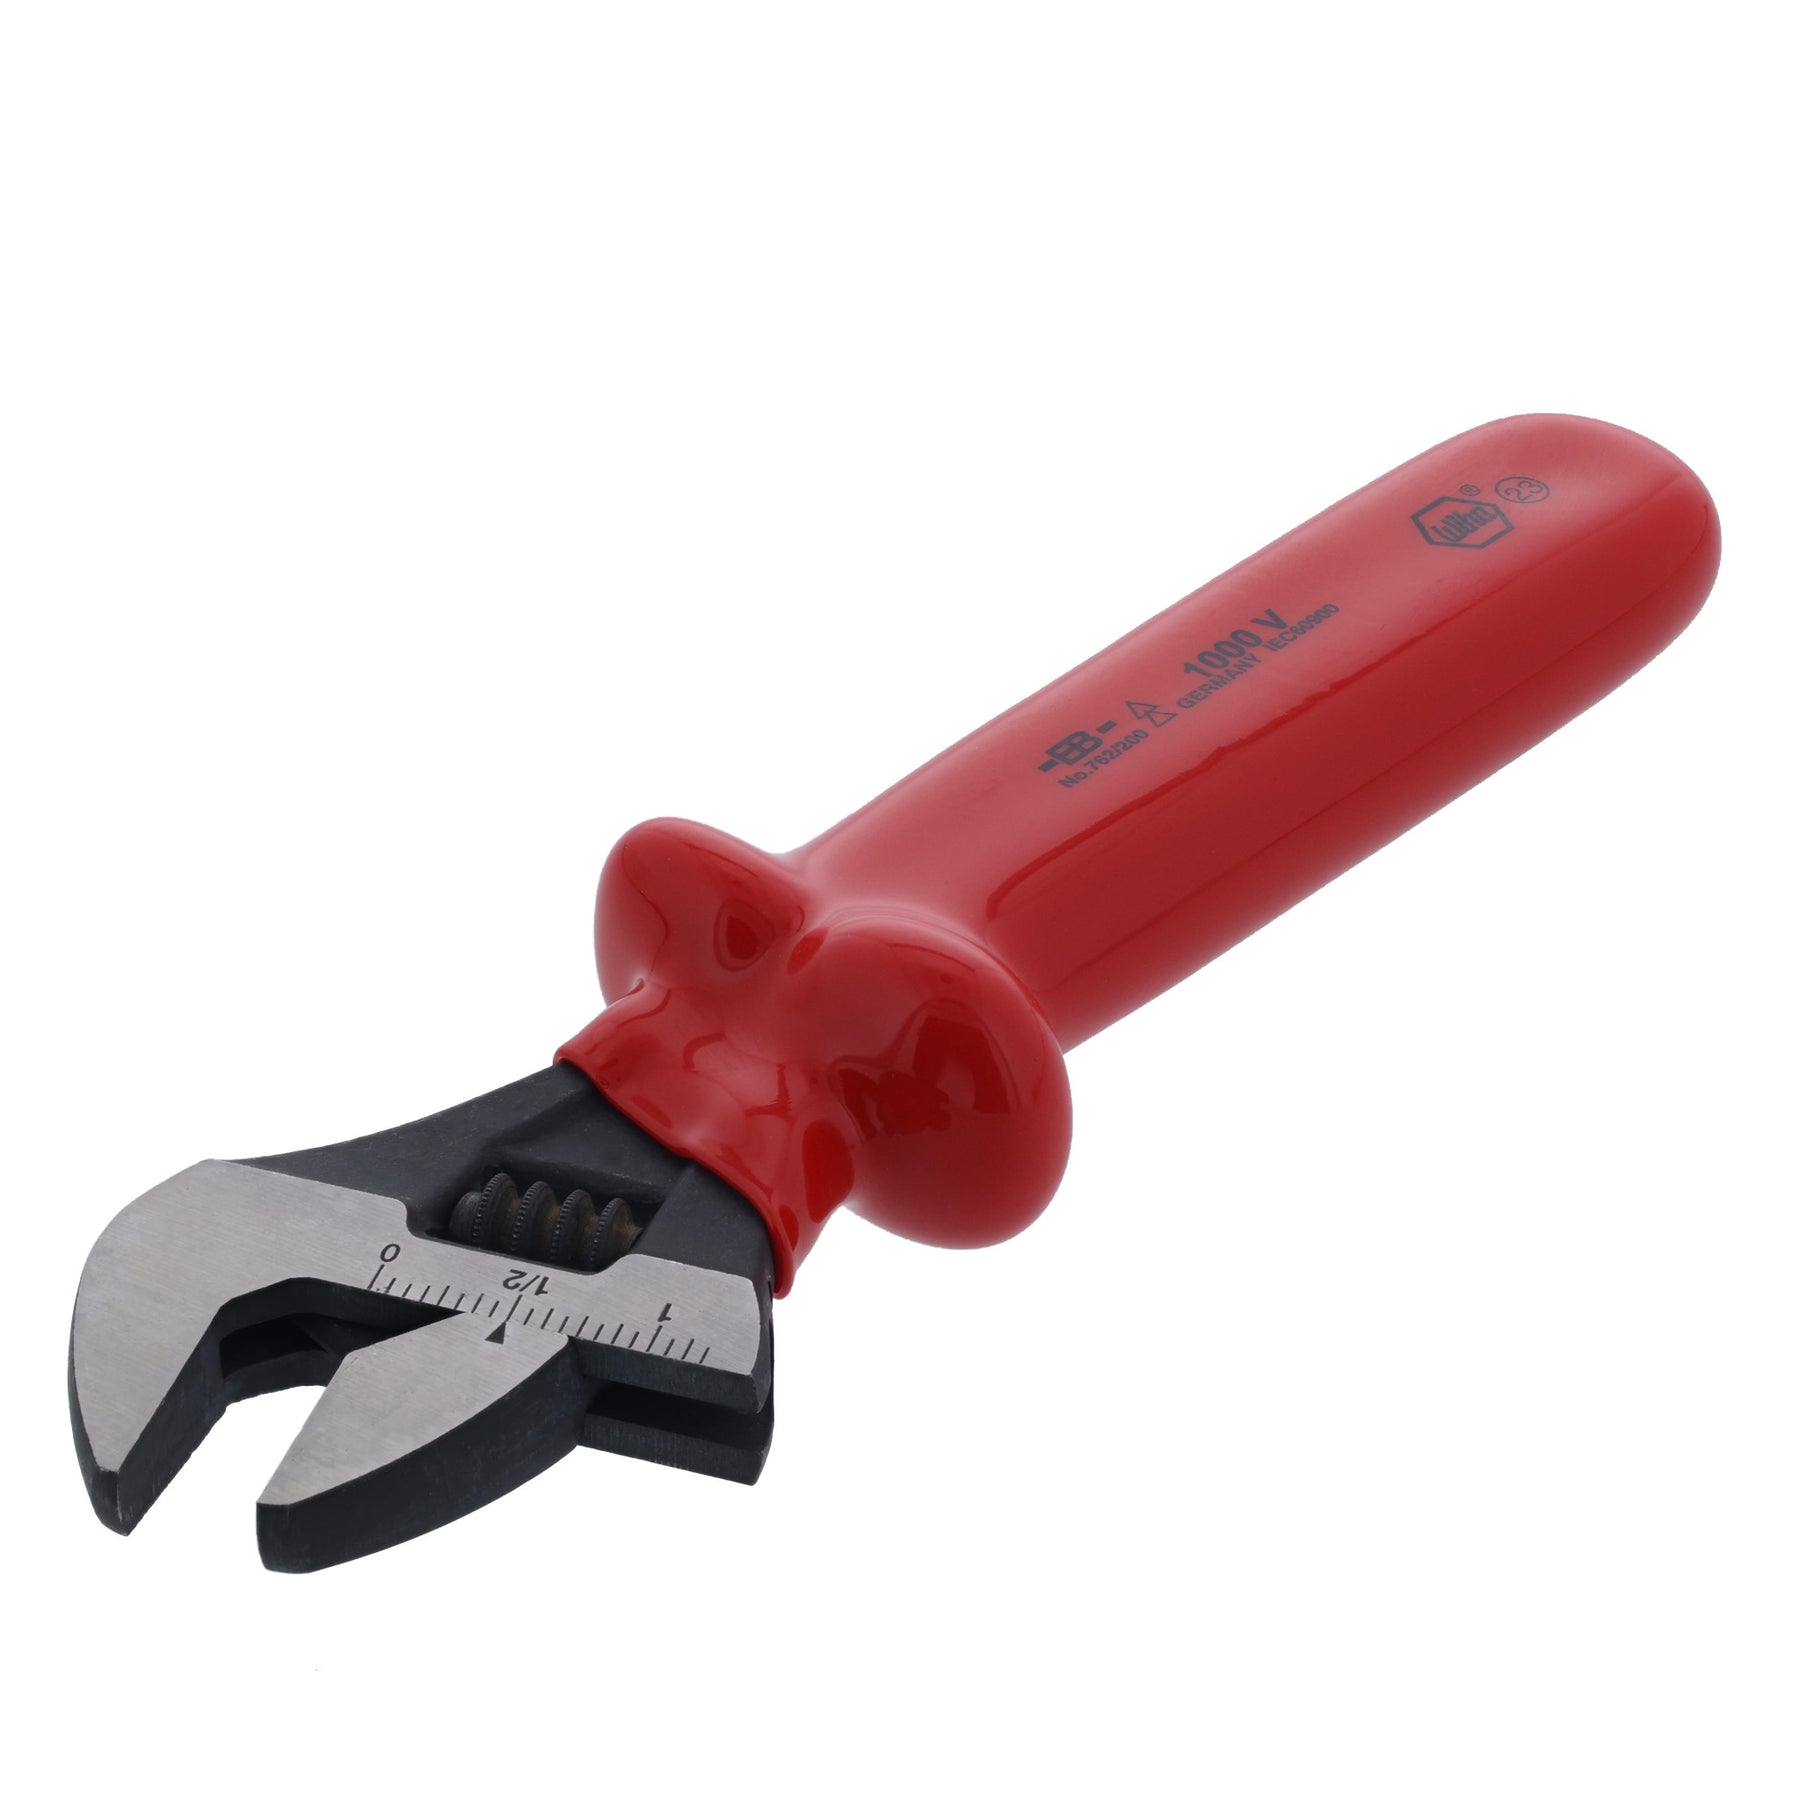 Insulated Adjustable Wrench 8"